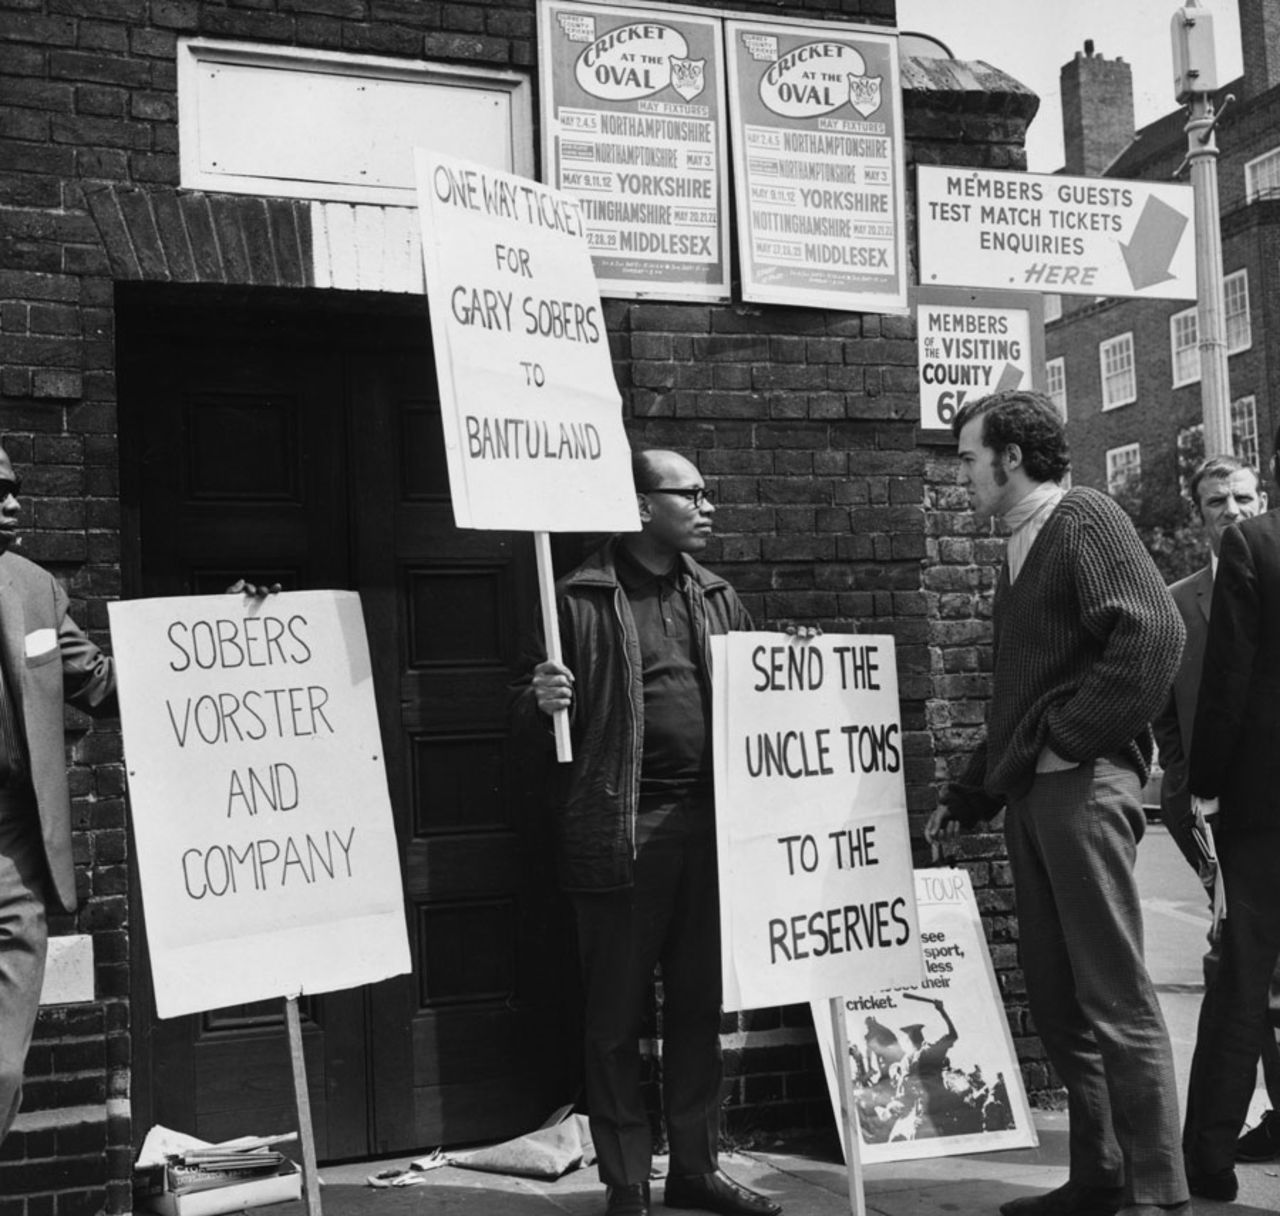 Peter Hain, leader of the campaign to stop the South African tour ('Stop the 70's Tour'), talks to one of the demonstrators in the demo against against West Indian cricketer Gary Sobers and three of his Nottinghamshire team-mates, The Oval, London, May 20, 1970